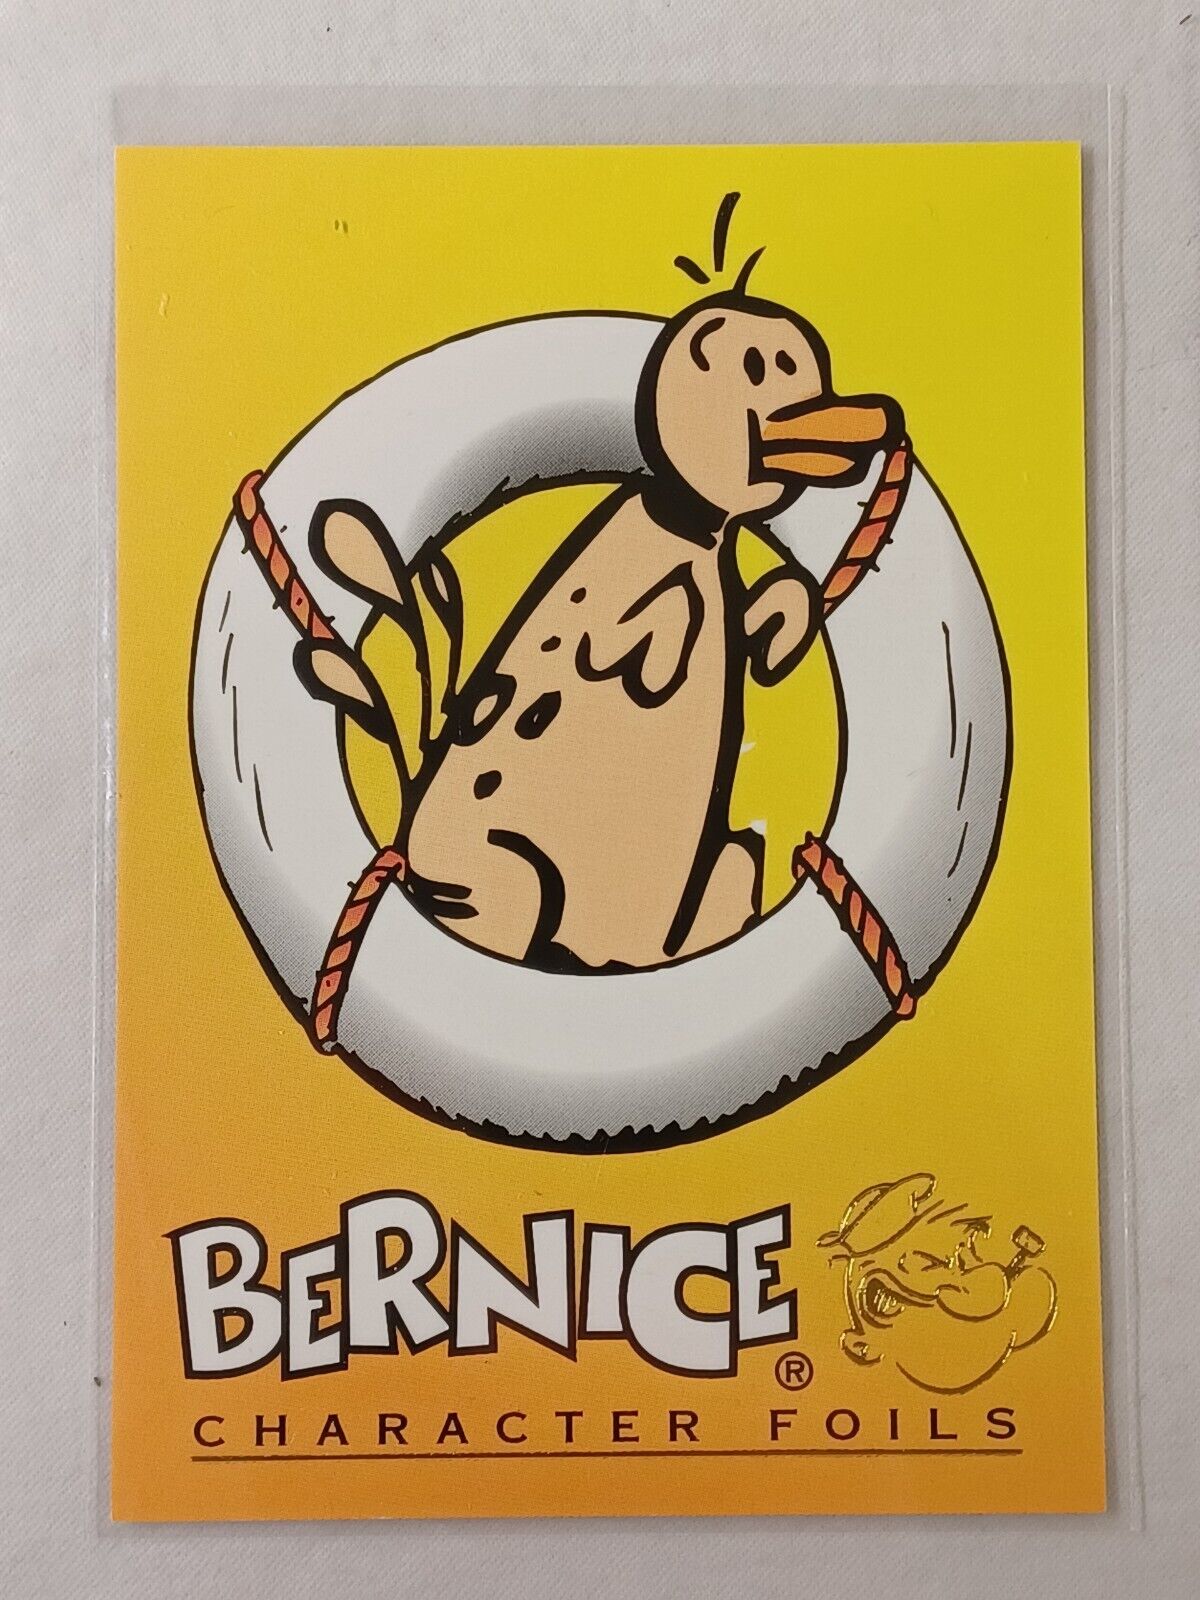 1994 Popeye Character Foil #11 Bernice Whiffle Hen CF 11 of 12 Insert Chase Card